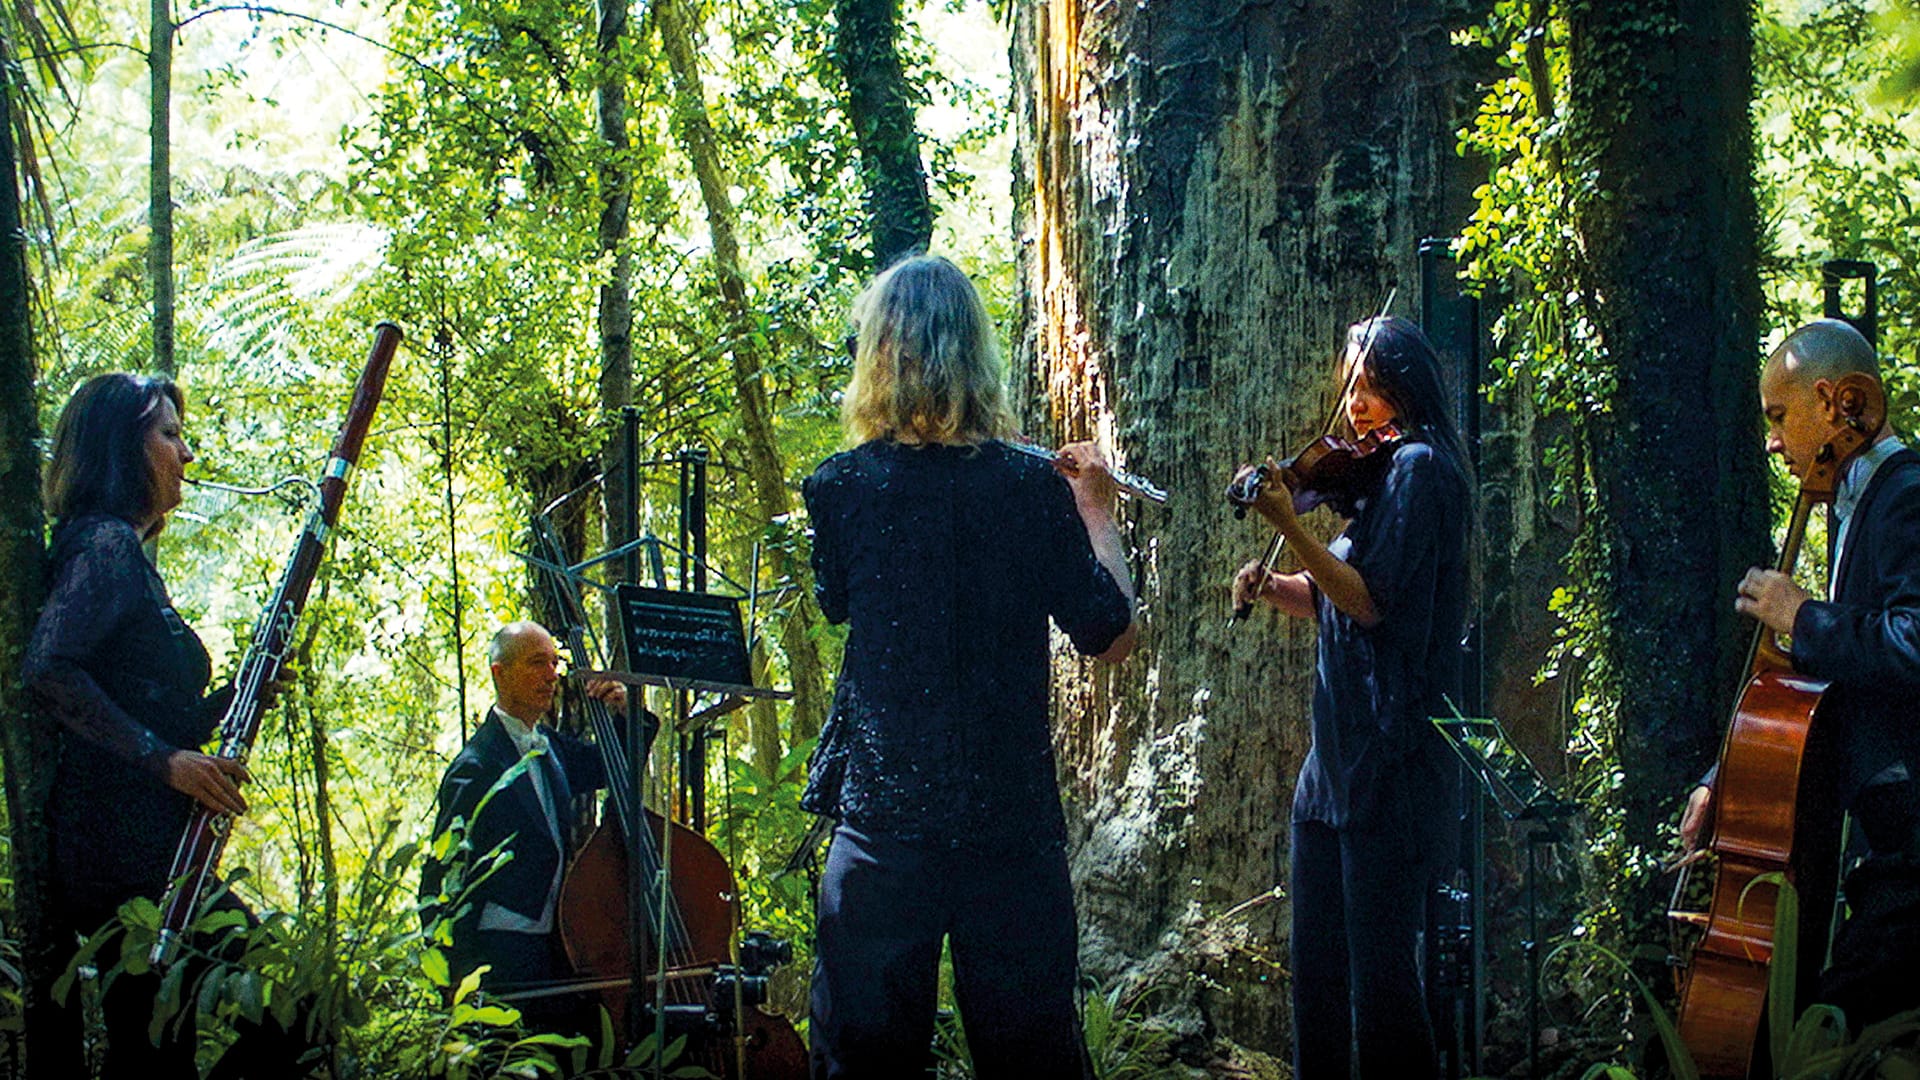 People playing instruments in a forest